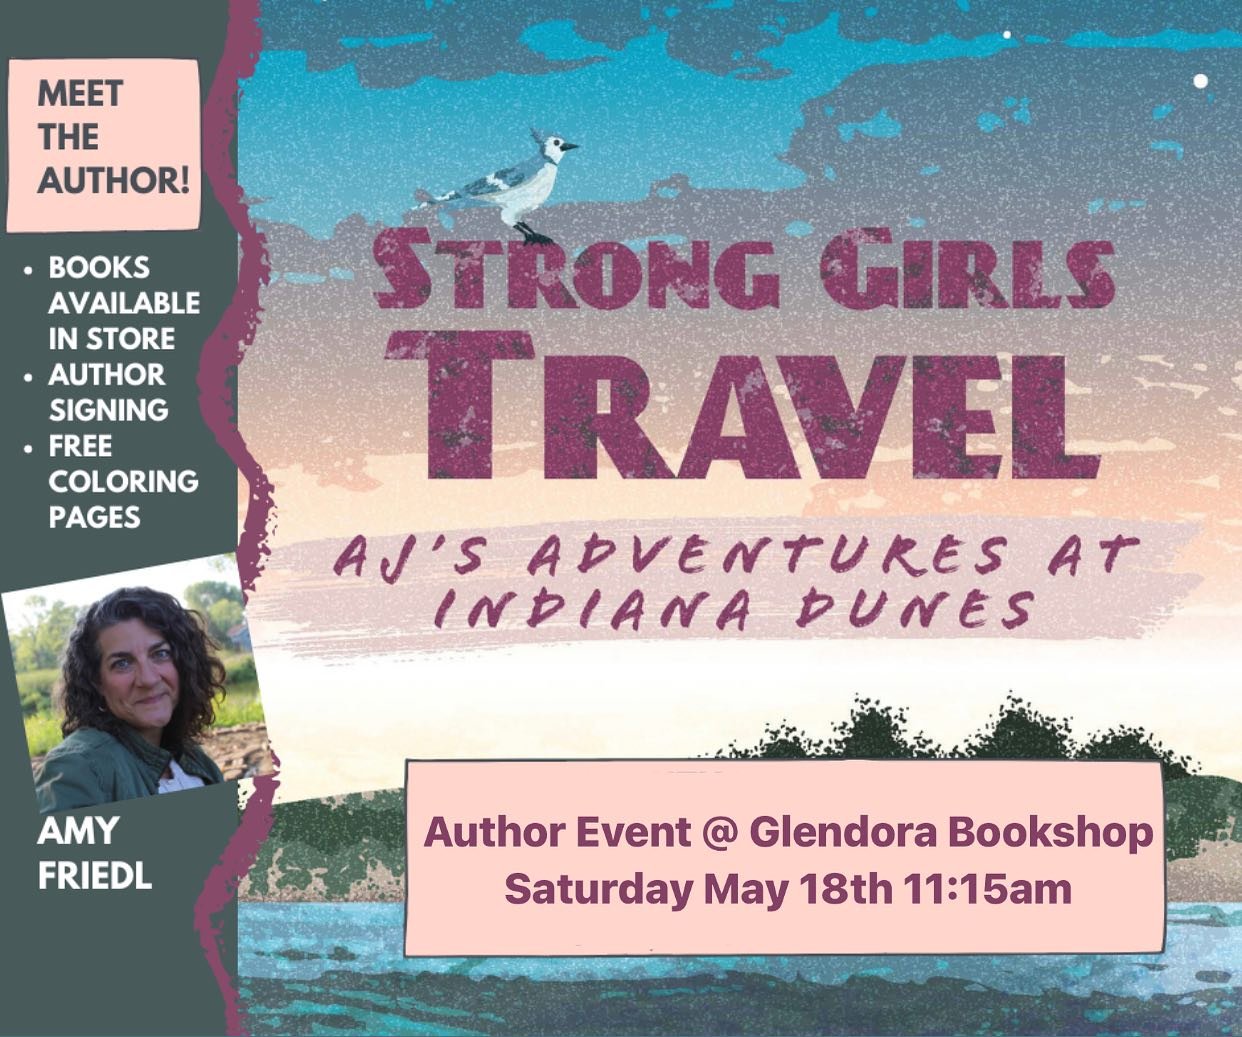 We are pleased to host author Amy Friedl next Saturday May 18th - reading @ 11:15am! We hope you can join us! 

******

#glendorabookshopmi #indiebookstore #independentbookstore #authorreading #amyfriedl #bookstagram #books #warrendunes